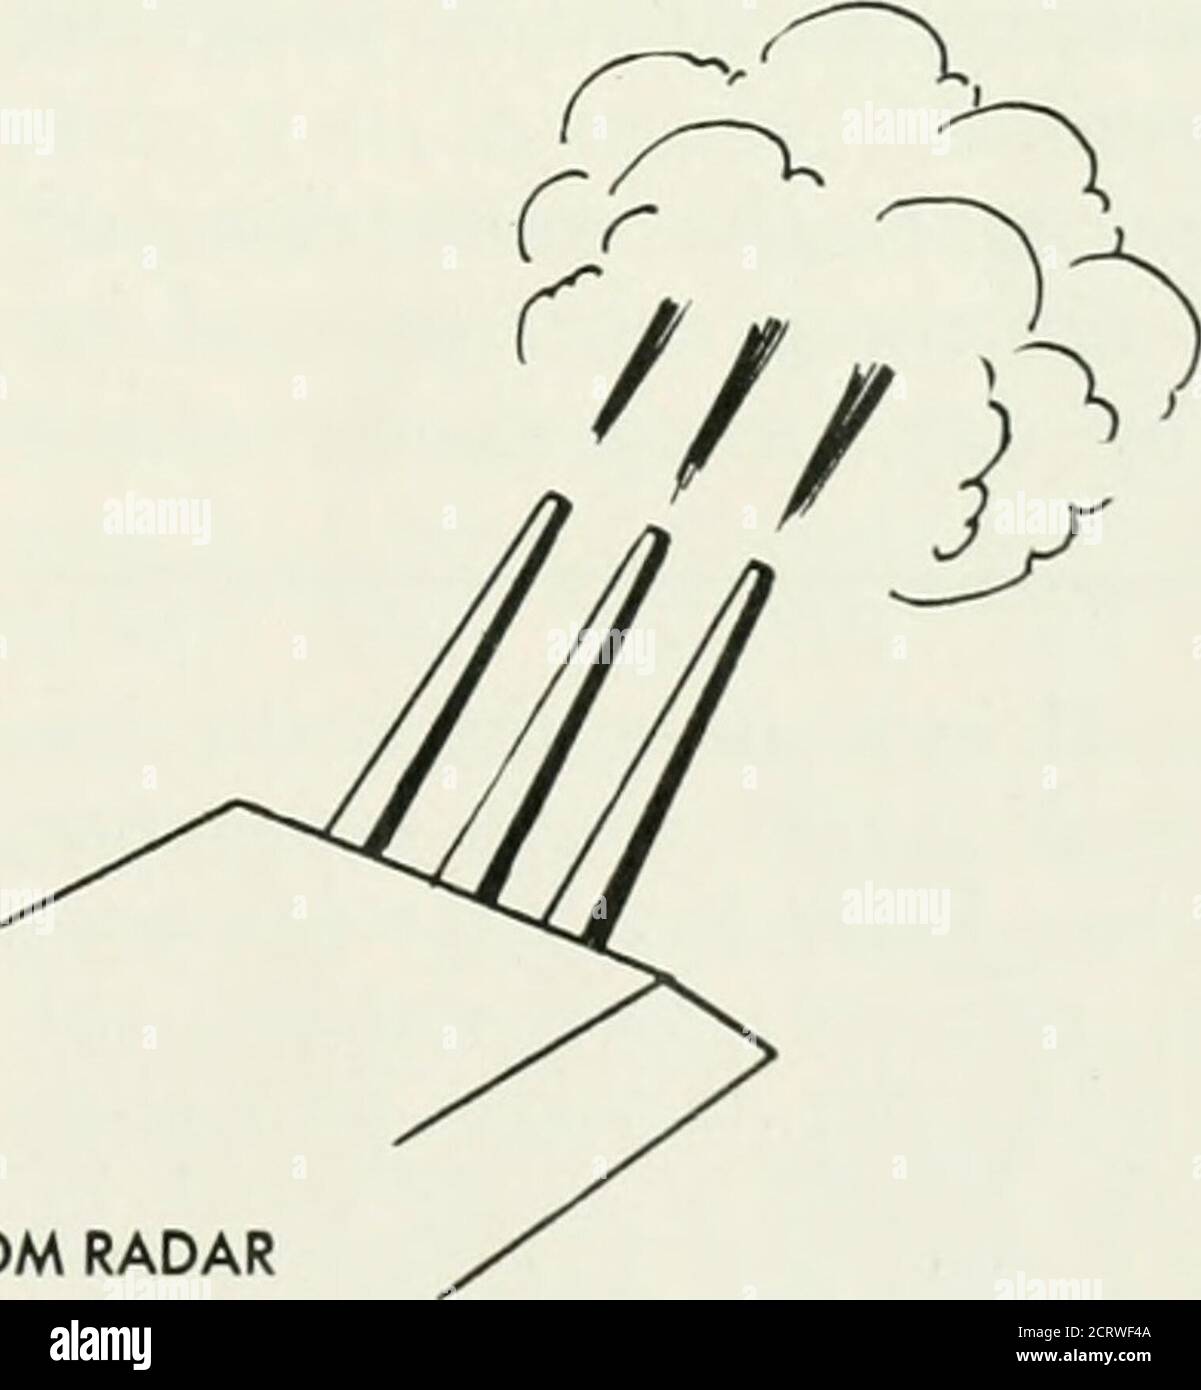 . Bell telephone magazine . LEFT BEARING right DATA FROM RADARUSED TO AIM GUNS. How RADAR helps control the fire of a ships guns: the scope picture accuratelypresents the range and bearing of the target (large spot) and of shell splashes (three small spots) 238 Bell Telephone Magazine WINTER Laboratories, into equipments in ser-vice by Western Electrics field engi-neers and Navy personnel. Therewere in the fleet on V-J Day largenumbers of modernized Mark 3s and4s, and the Mark 8, which had under-gone many modernizations, was stilla most valuable element in radar di-rection of large guns. Radar Stock Photo